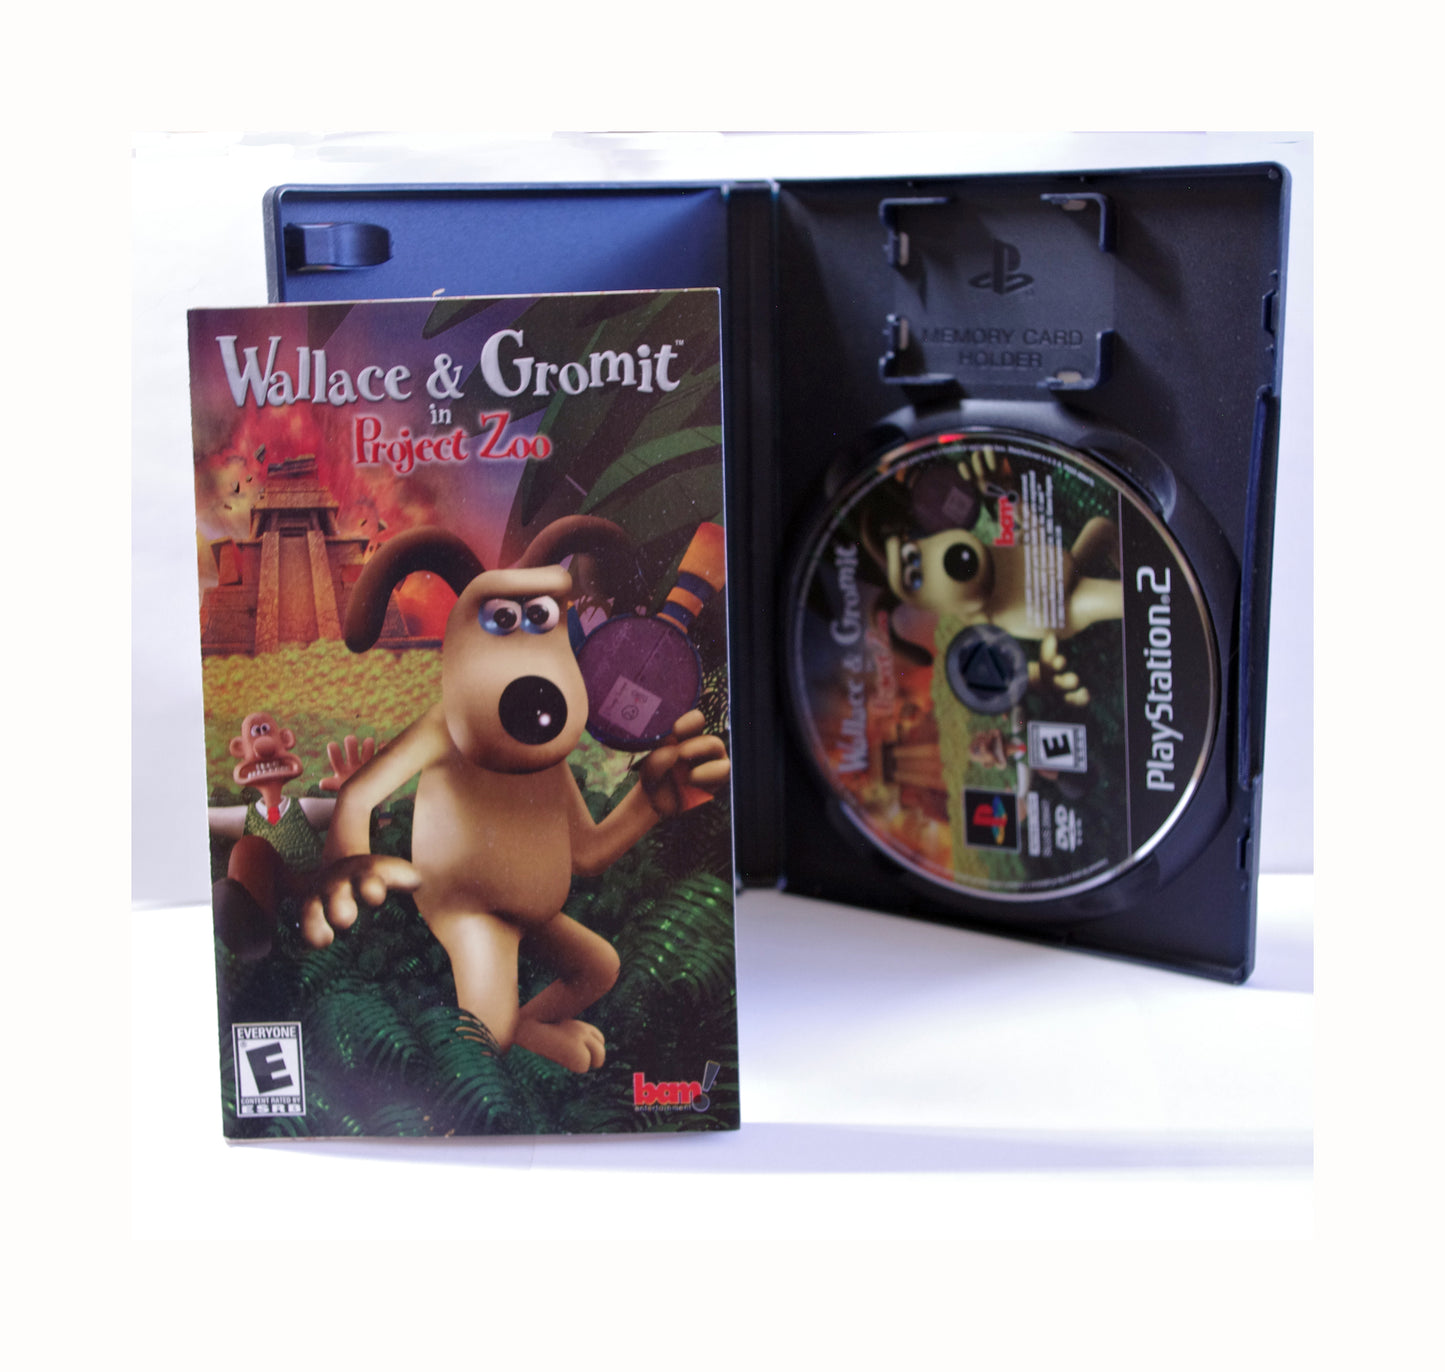 PlayStation 2 Game - Wallace & Gromit in Project Zoo